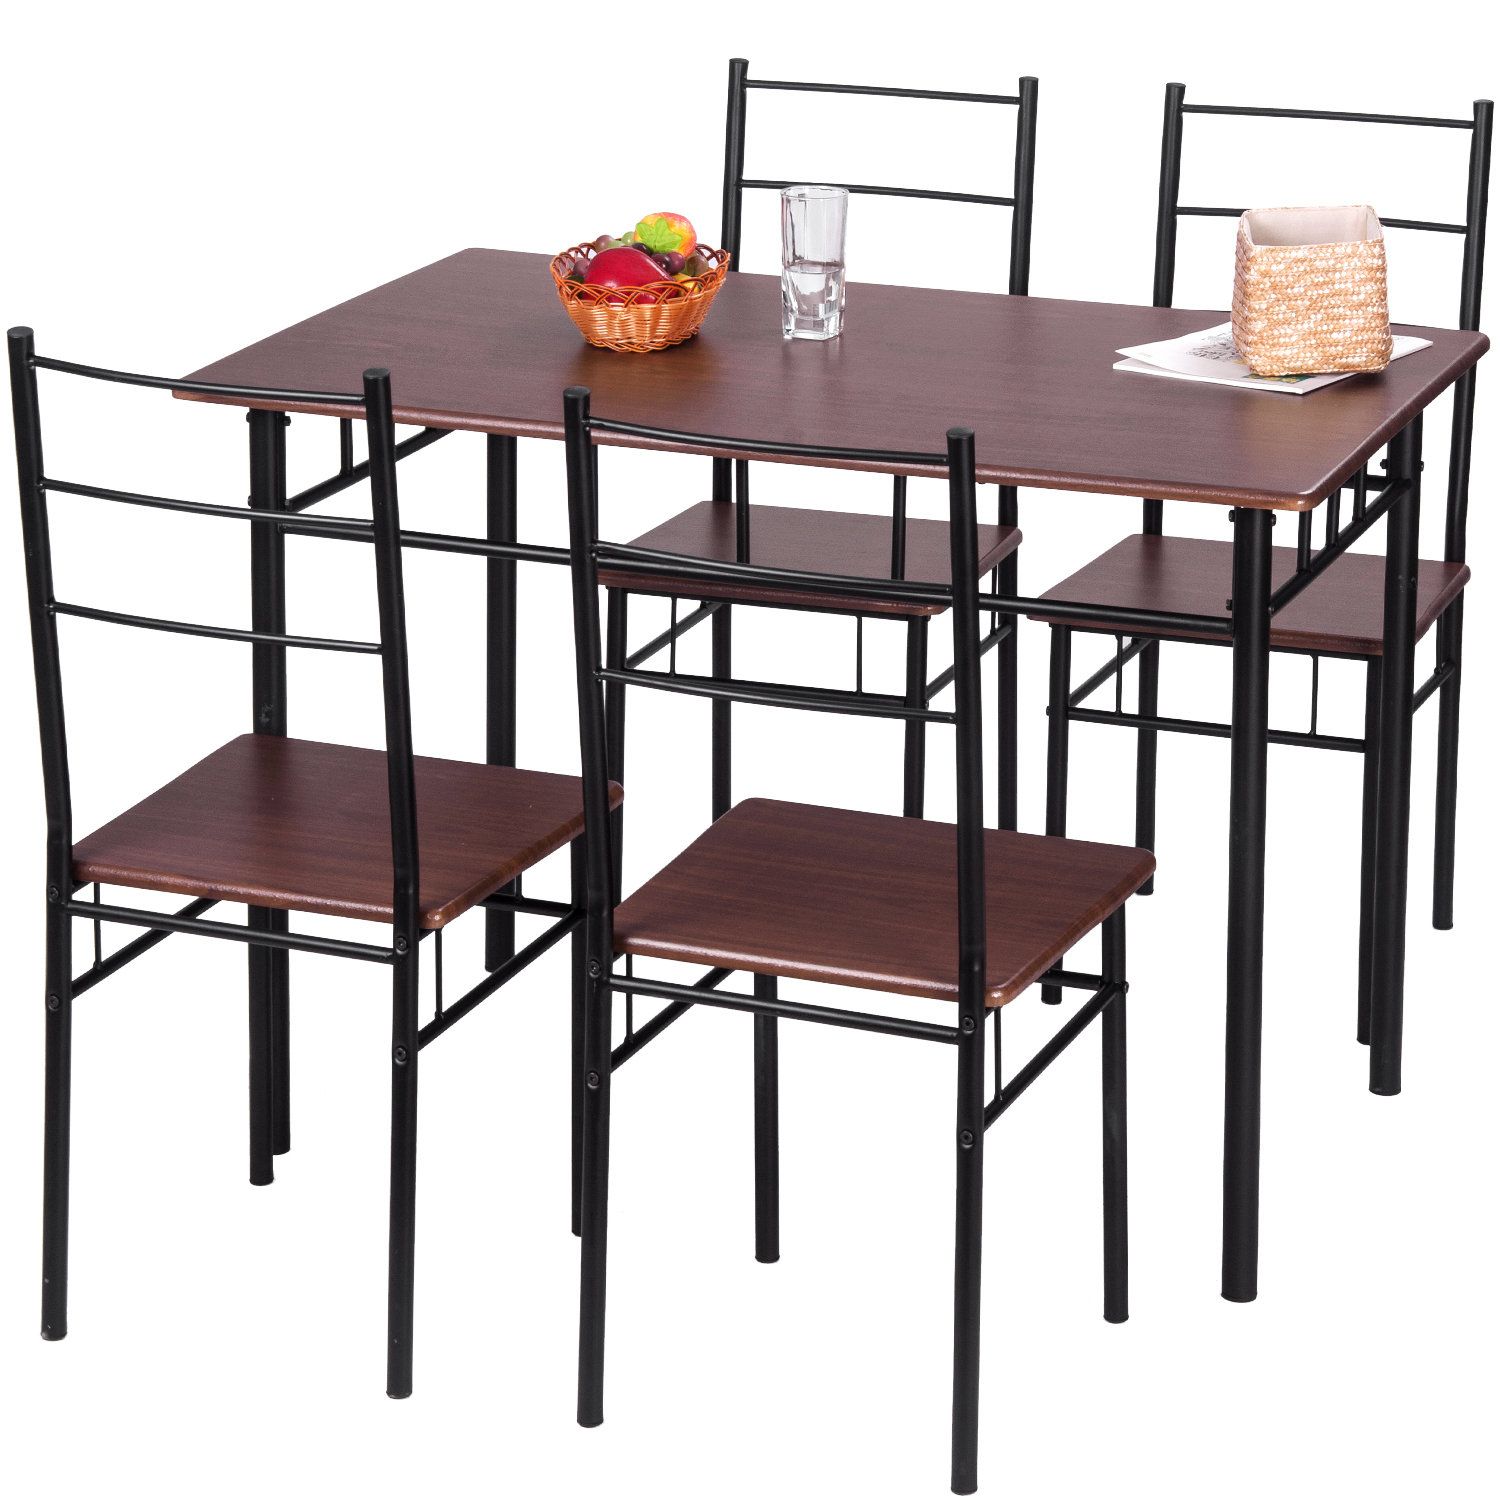 Most Recently Released Liles 5 Piece Breakfast Nook Dining Sets With Regard To Merax 5 Piece Breakfast Nook Dining Set & Reviews (View 6 of 20)